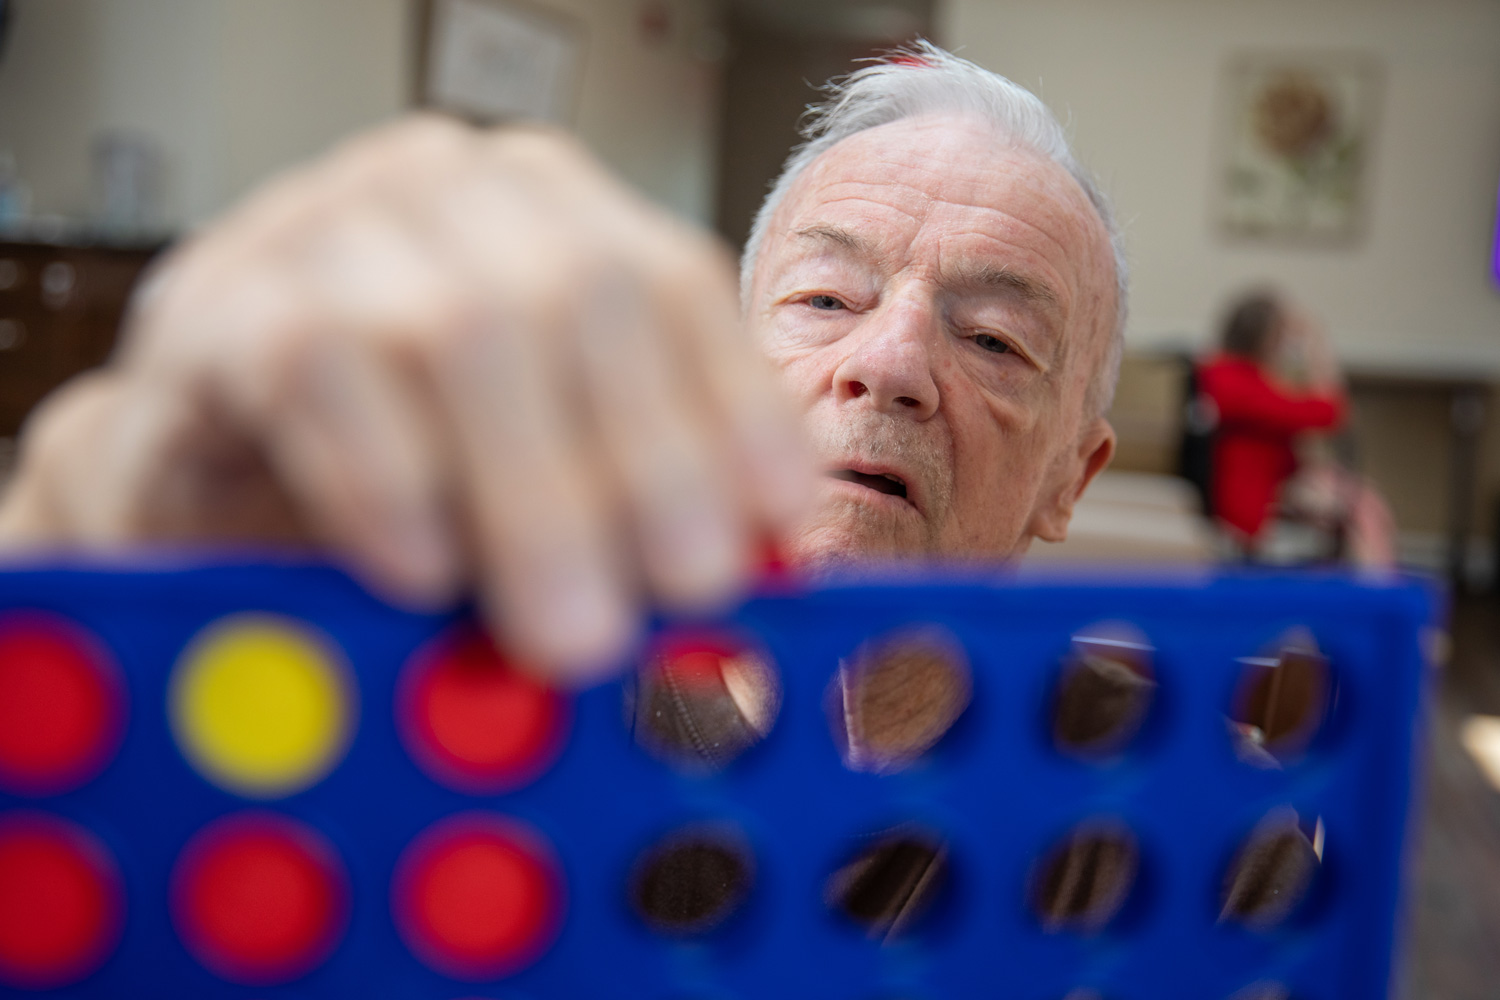 resident playing connect four